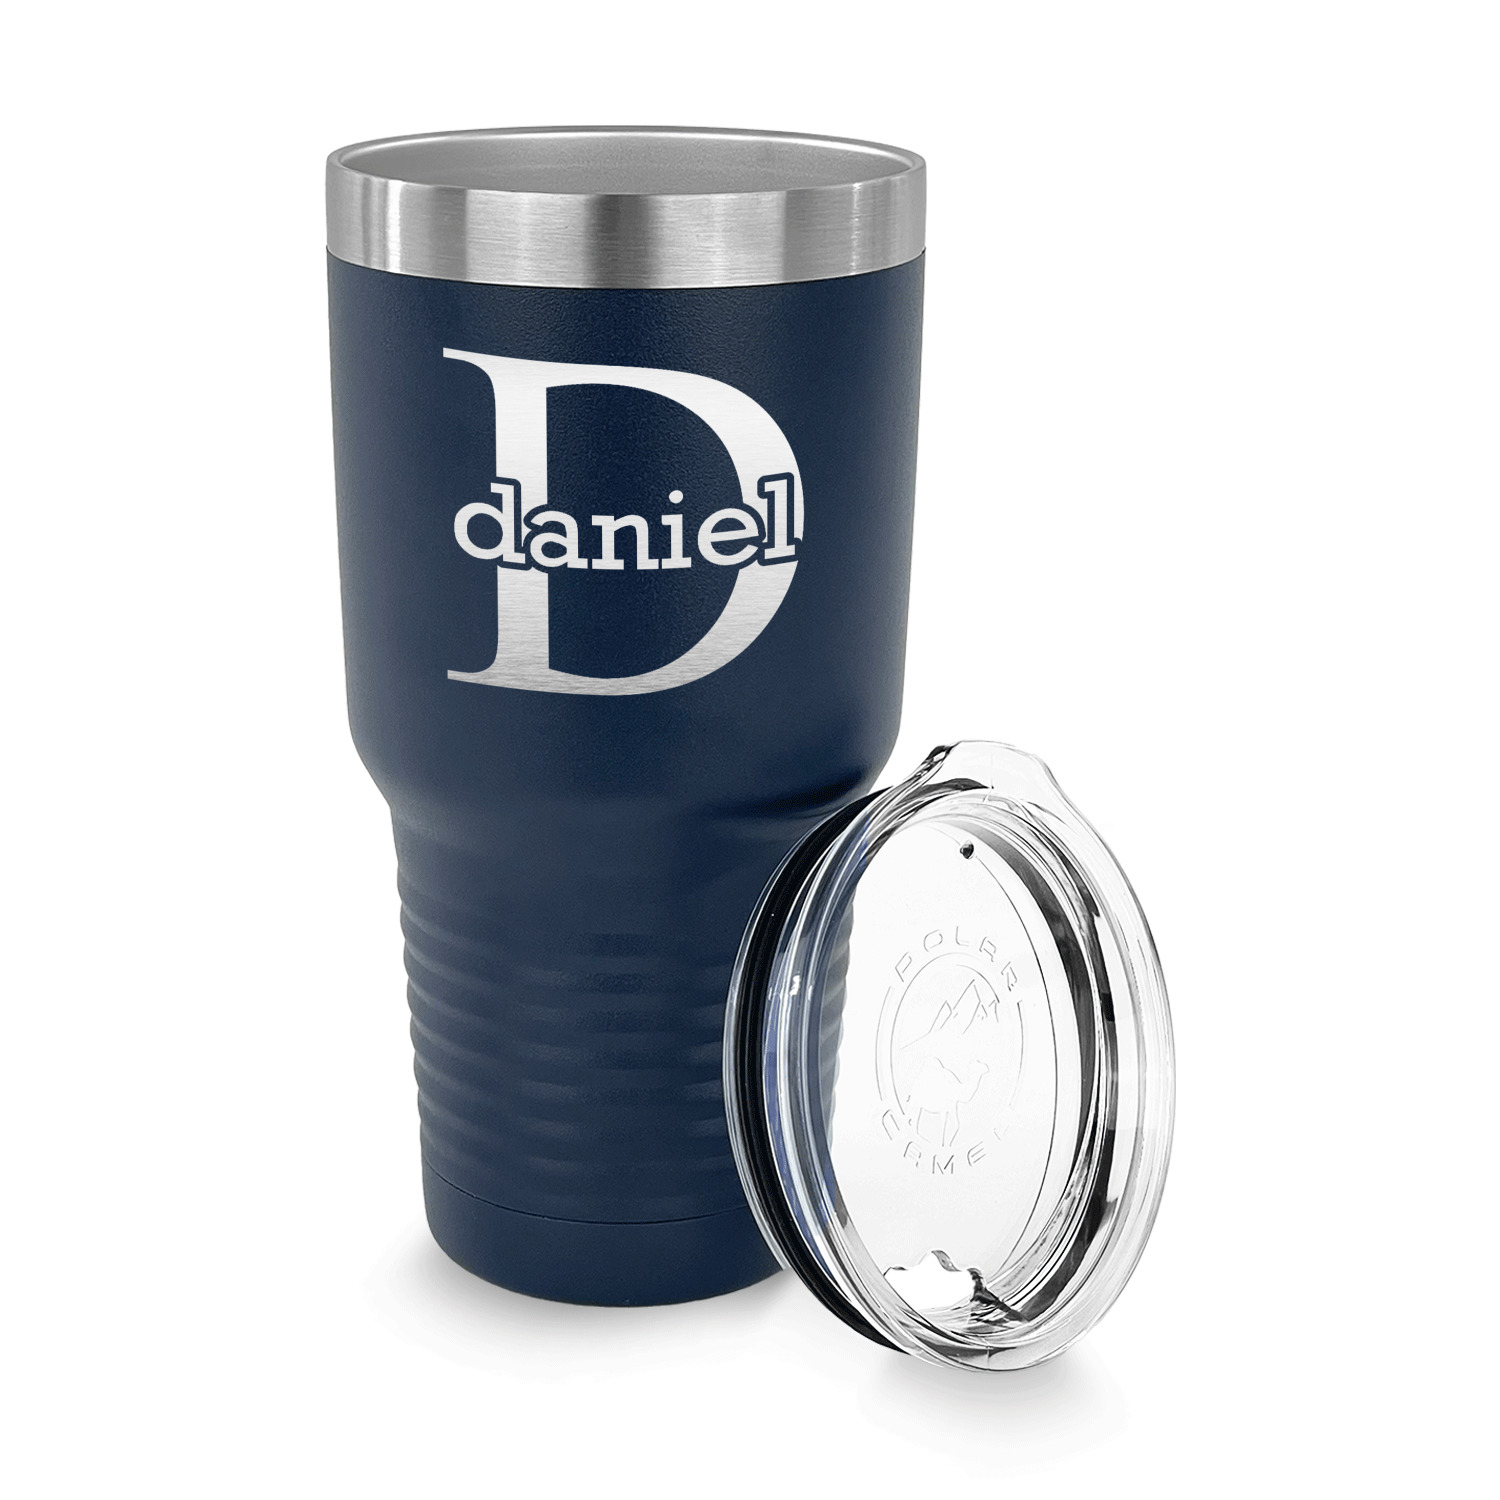 https://www.youcustomizeit.com/common/MAKE/837778/Name-Initial-for-Guys-30-oz-Stainless-Steel-Ringneck-Tumblers-Navy-LID-OFF.jpg?lm=1655151865